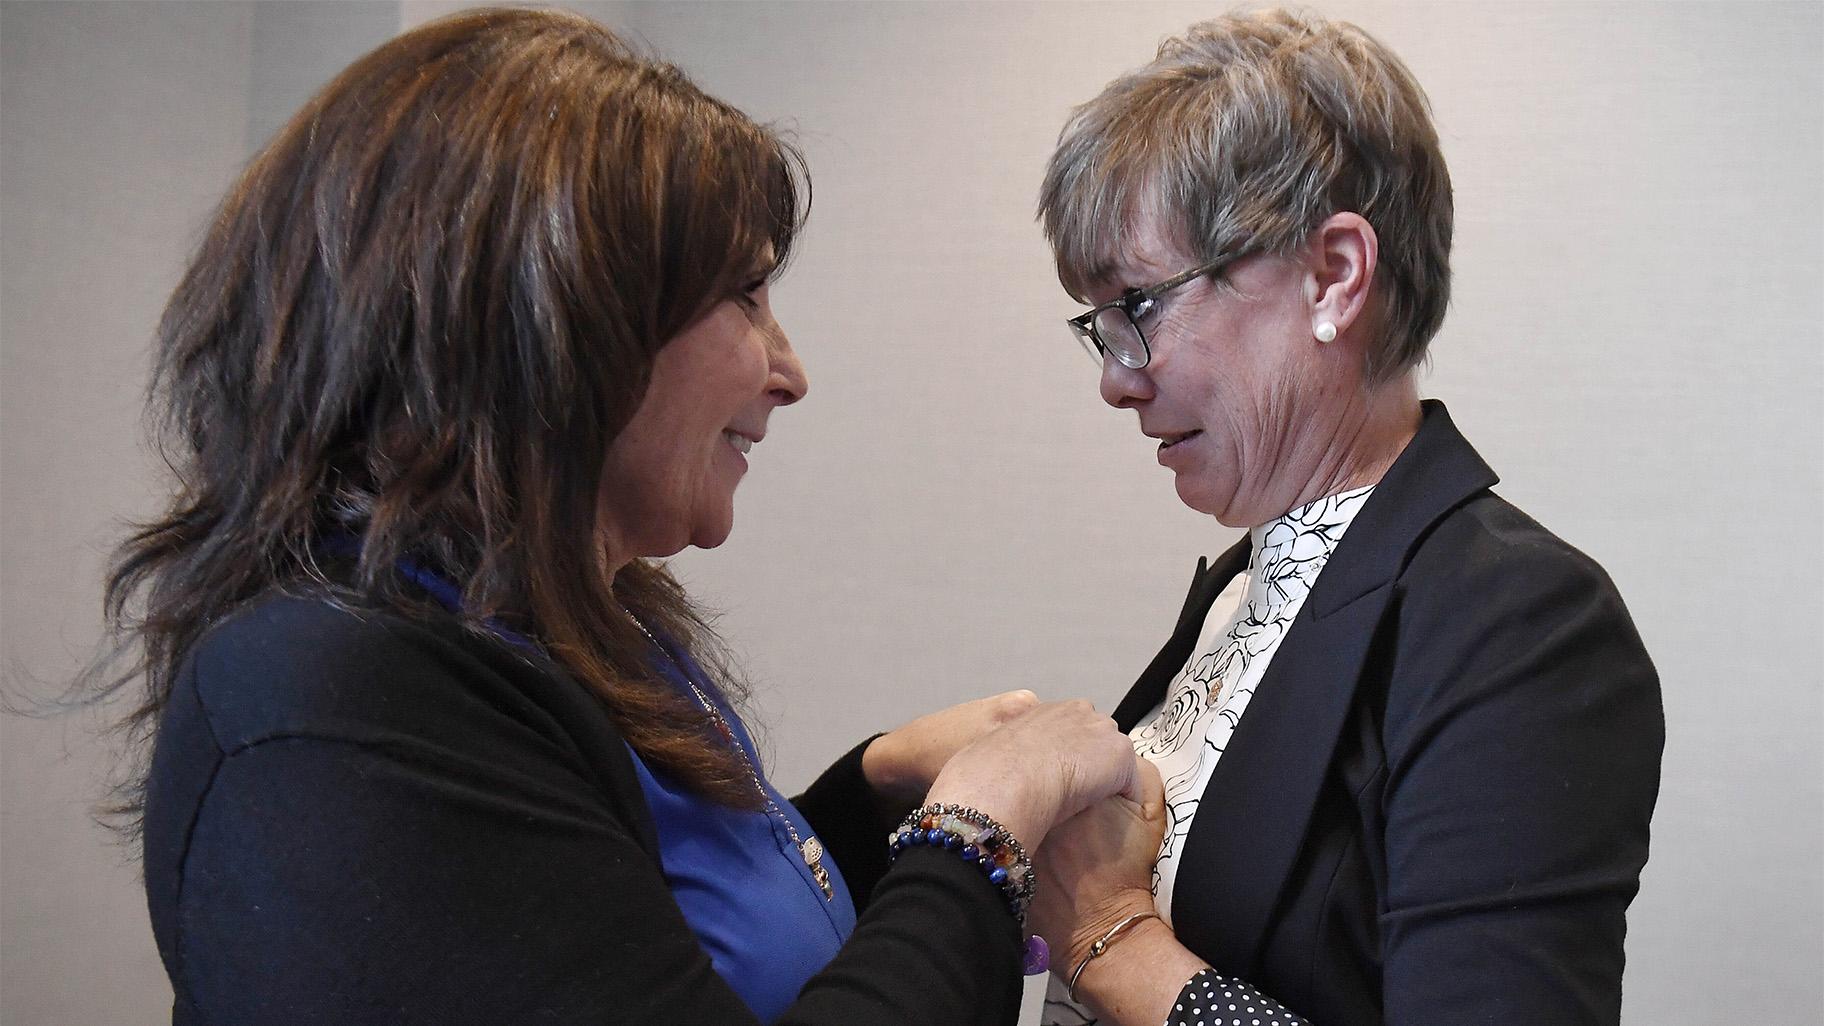 Liz Fitzgerald of Southington and Paige Niver of Manchester hold hands at the end of a news conference at Connecticut Attorney General William Tong's office, Thursday, March 3, 2022, in Hartford, Conn. Fitzgerald lost two sons to opioids and Niver's daughter became addicted to opioids after getting prescribed OxyContin at 14 years old. (AP Photo / Jessica Hill)